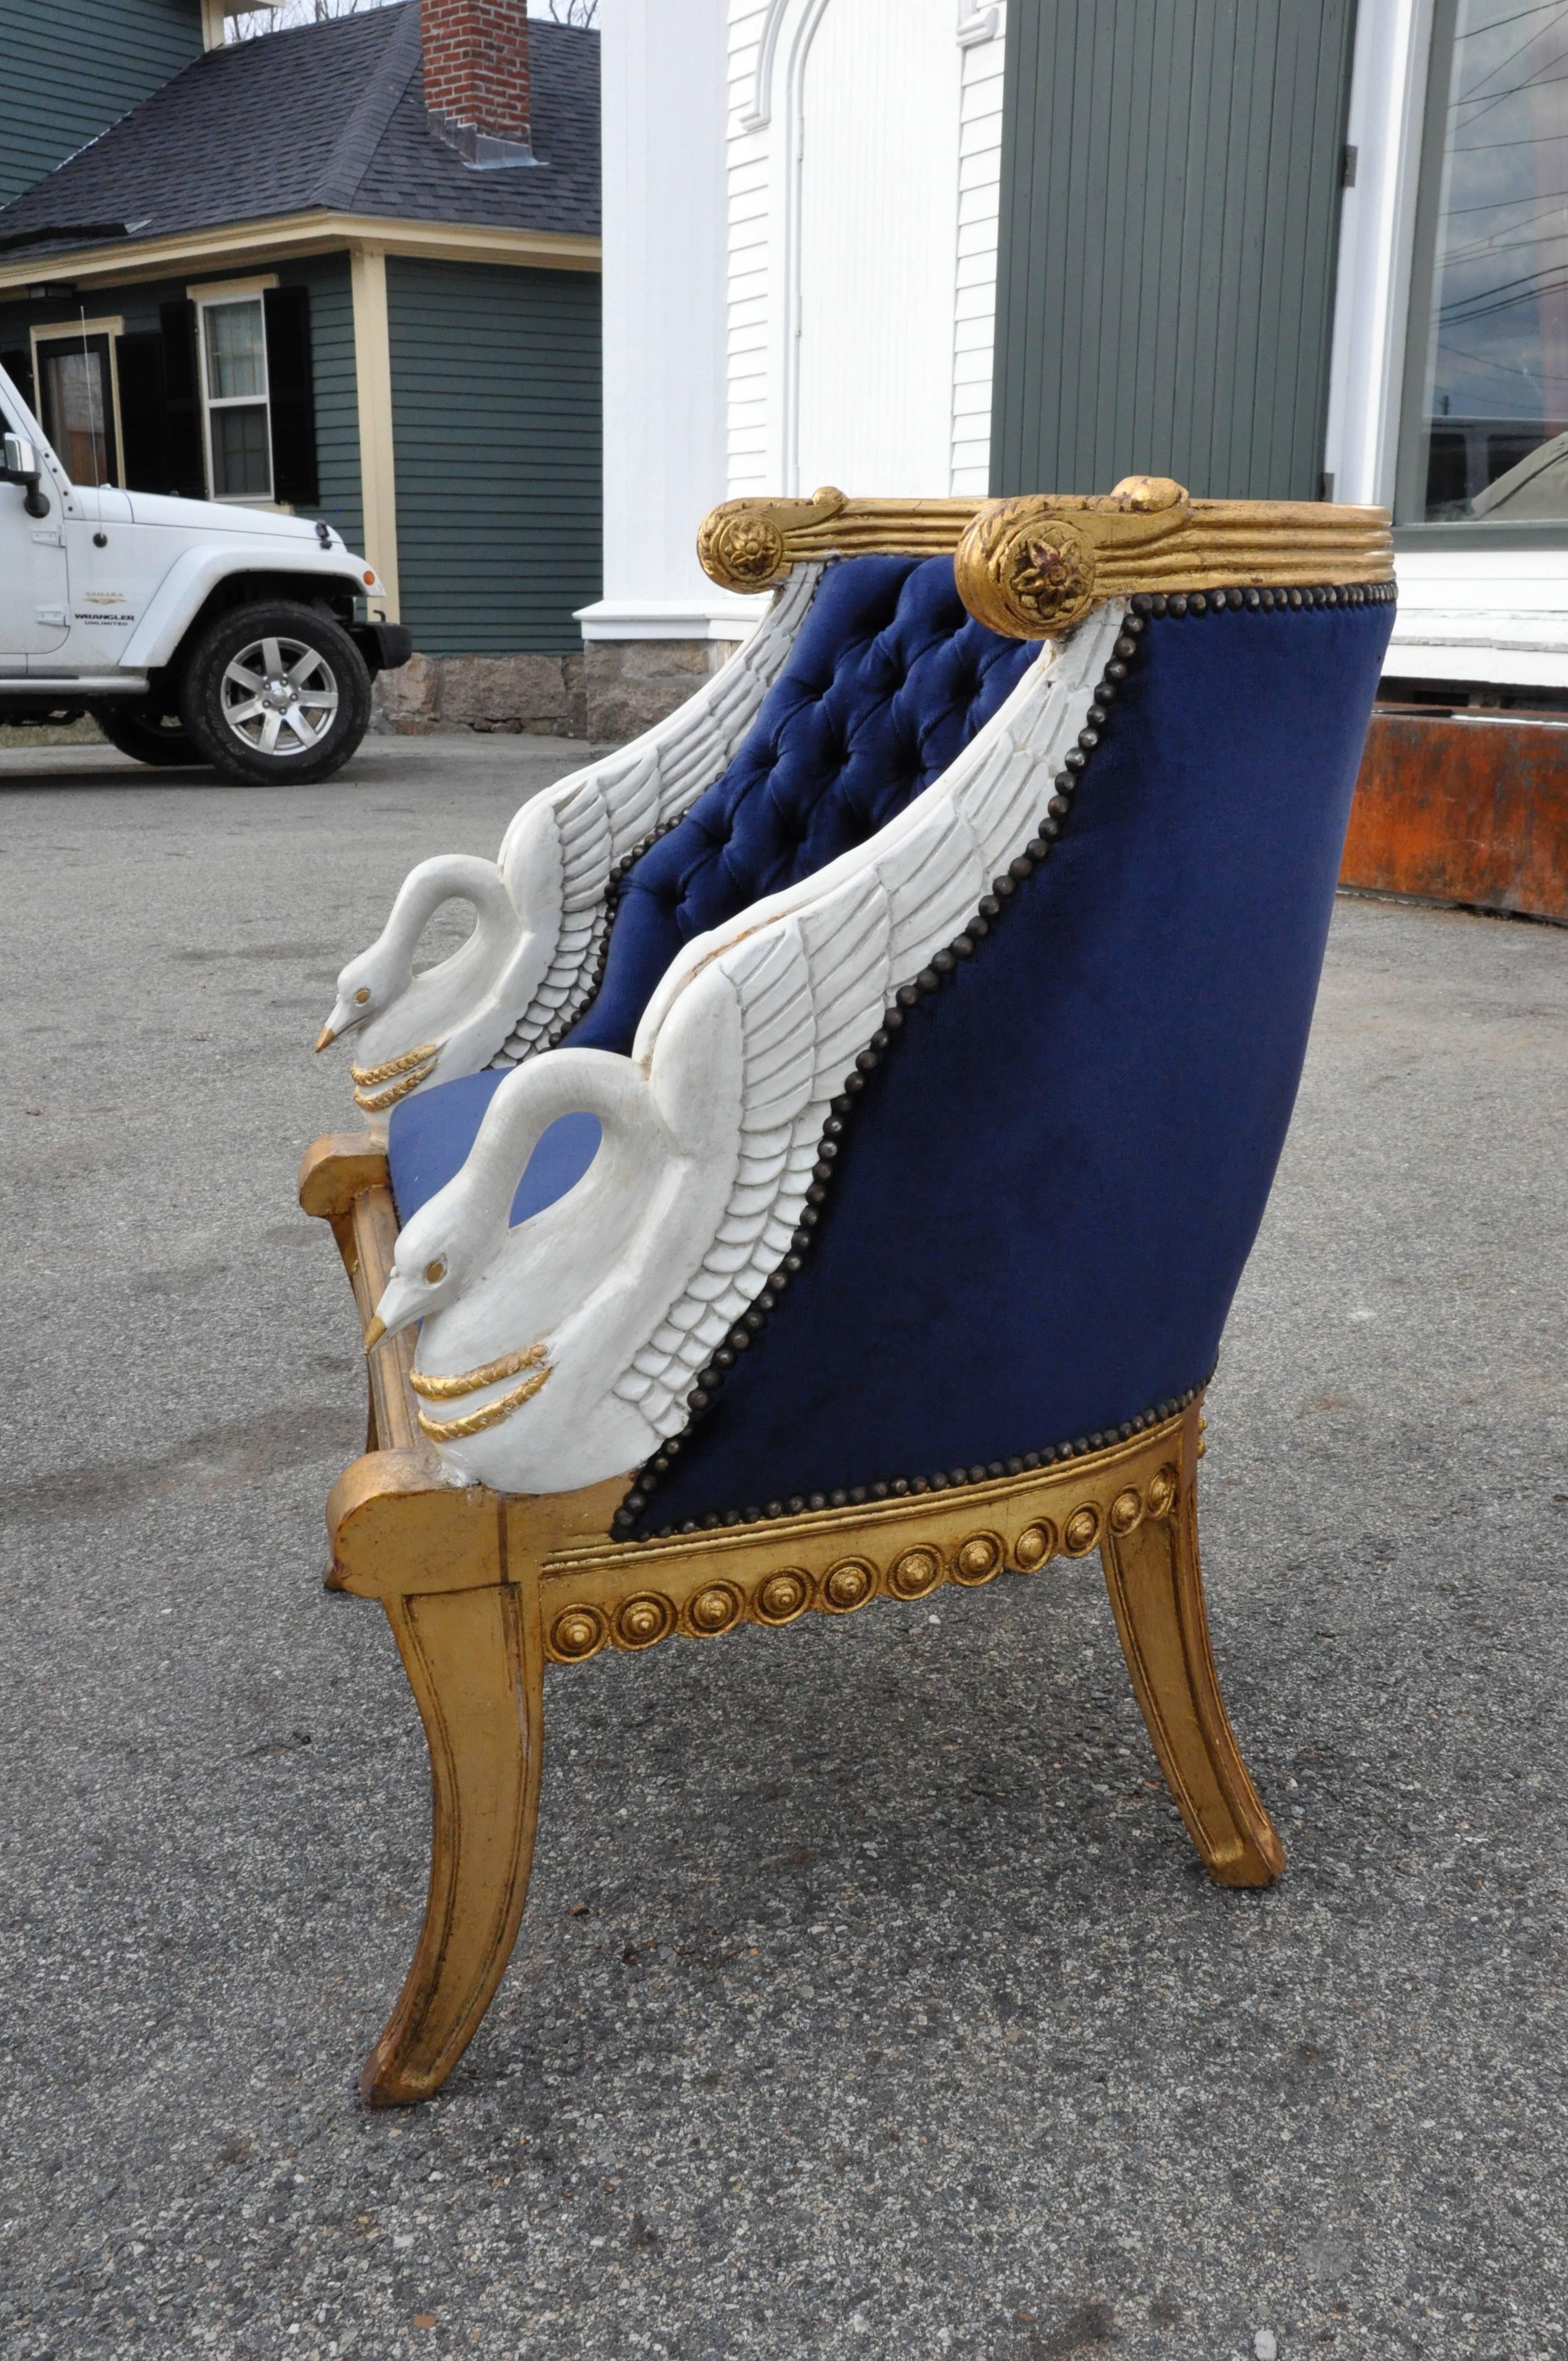 Pair of well carved and executed swan tub chairs in Empire style after Jacob.

Carved white painted swan supporting ample chair.
Solid and well built.